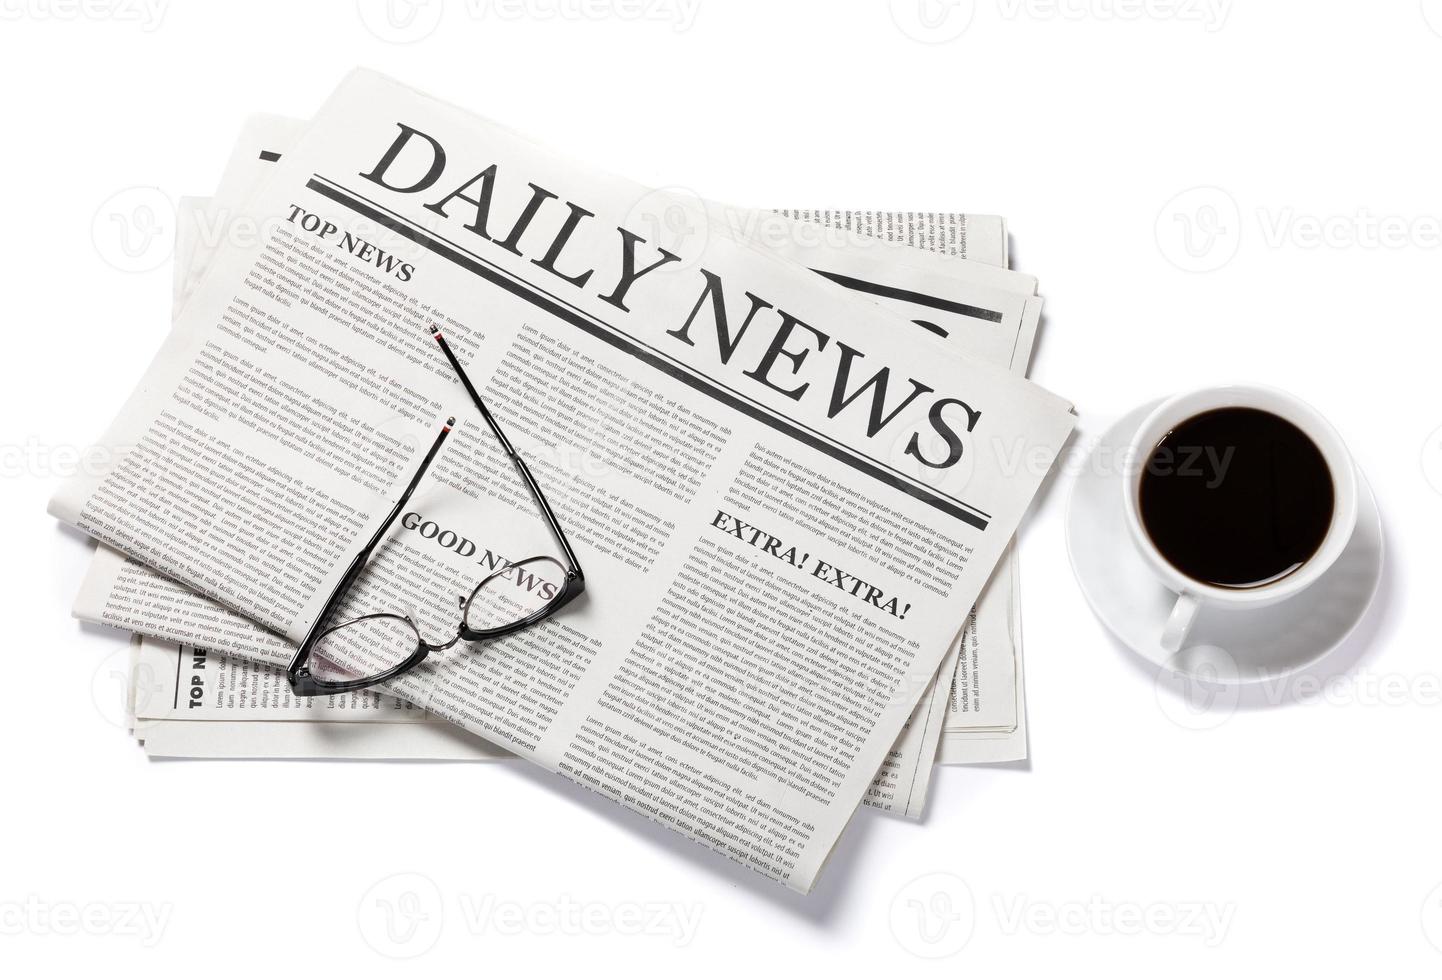 Business Newspaper with the headline News and glasses and coffee cup isolated on white background, Daily Newspaper mock-up concept photo